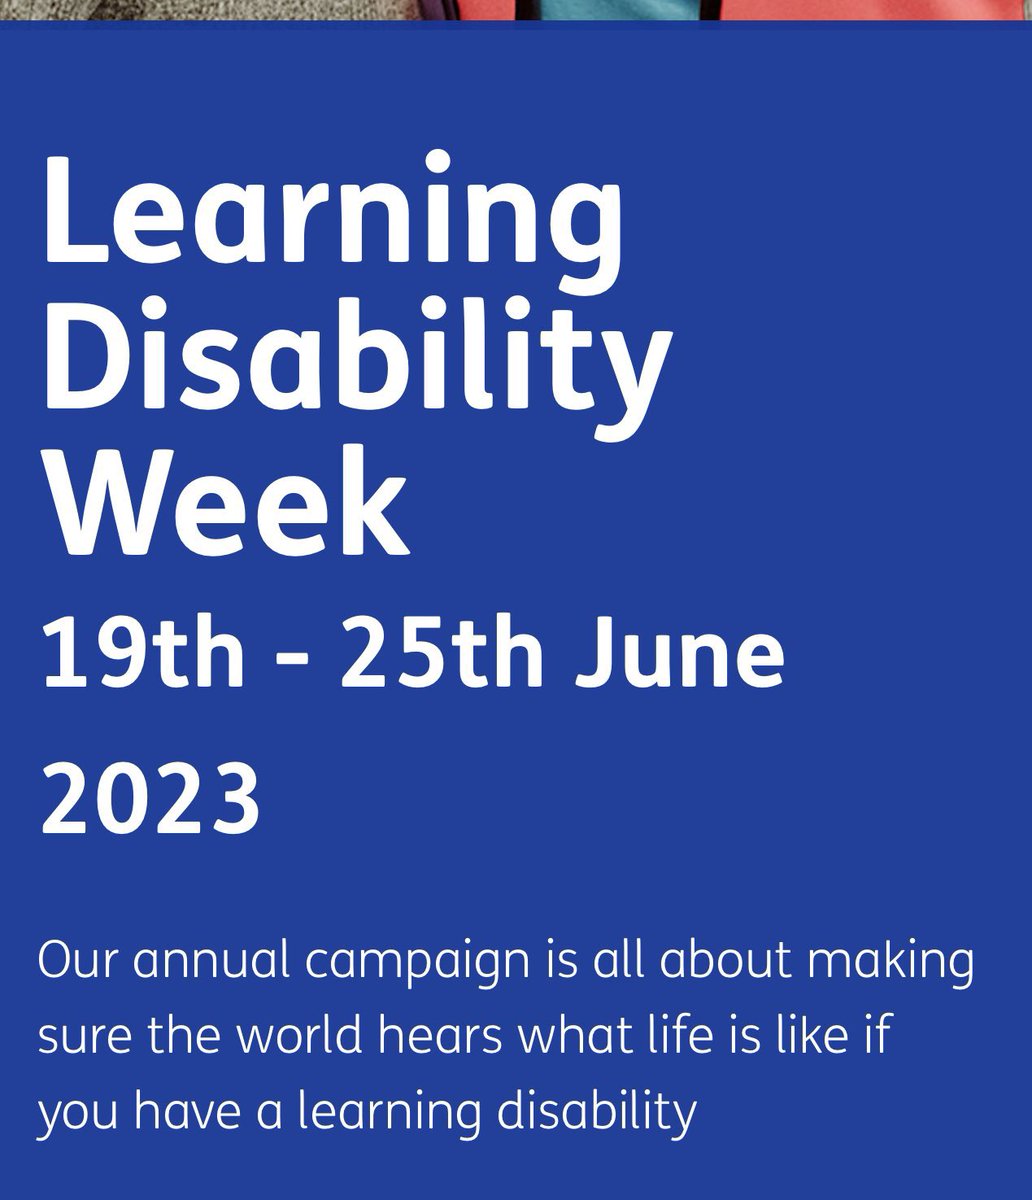 Get those diaries and calendars updated, and let's ensure the voices of people with learning disabilities and their carers are front and centre mencap.org.uk/LDWeek

 #LearningDisabilityNursing #learningdisability #Nursing #nurse #studentnurse